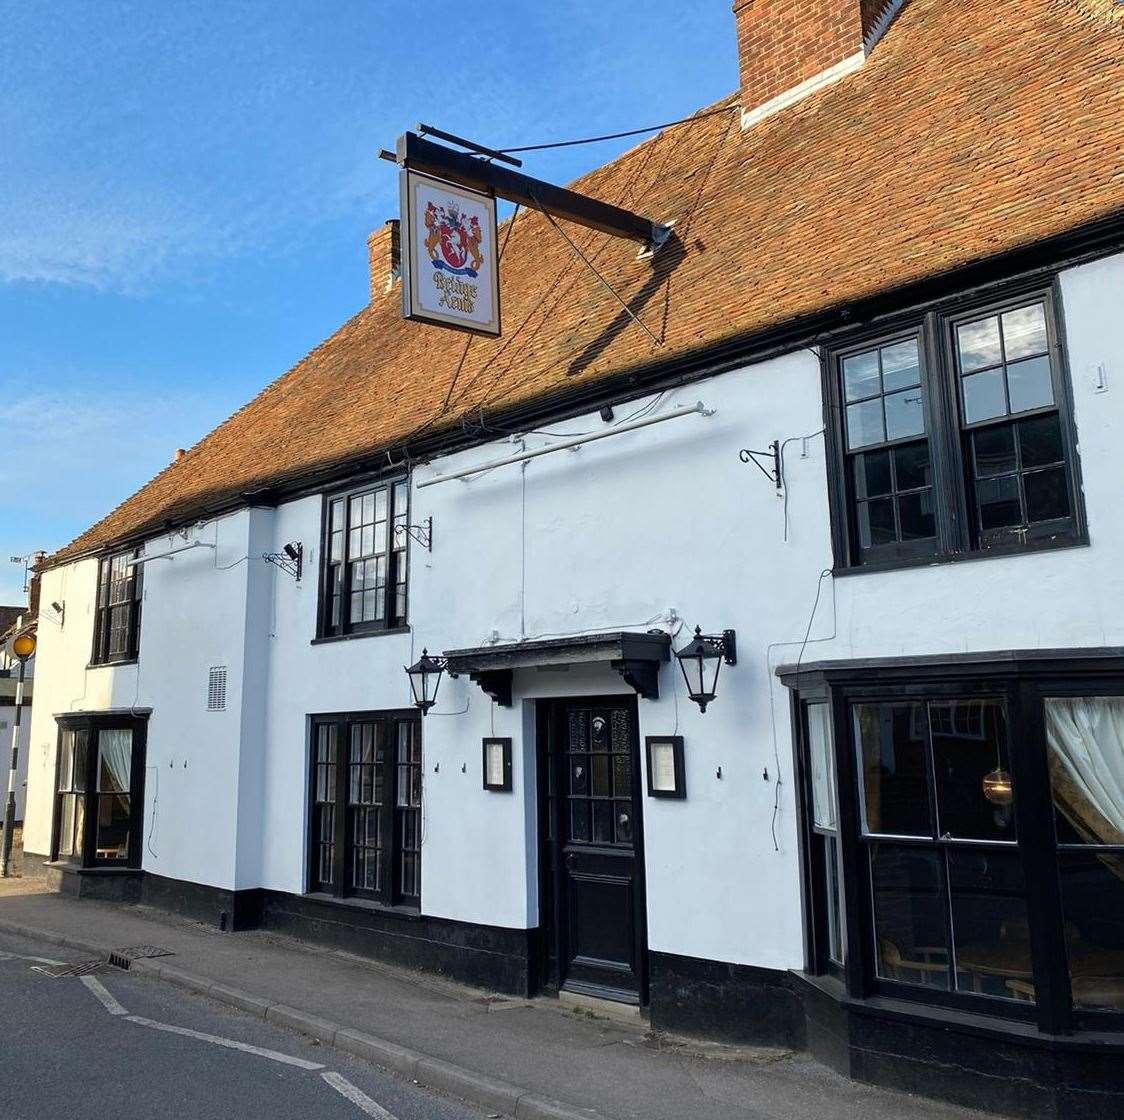 The Bridge Arms was included on the list of pubs to visit this summer